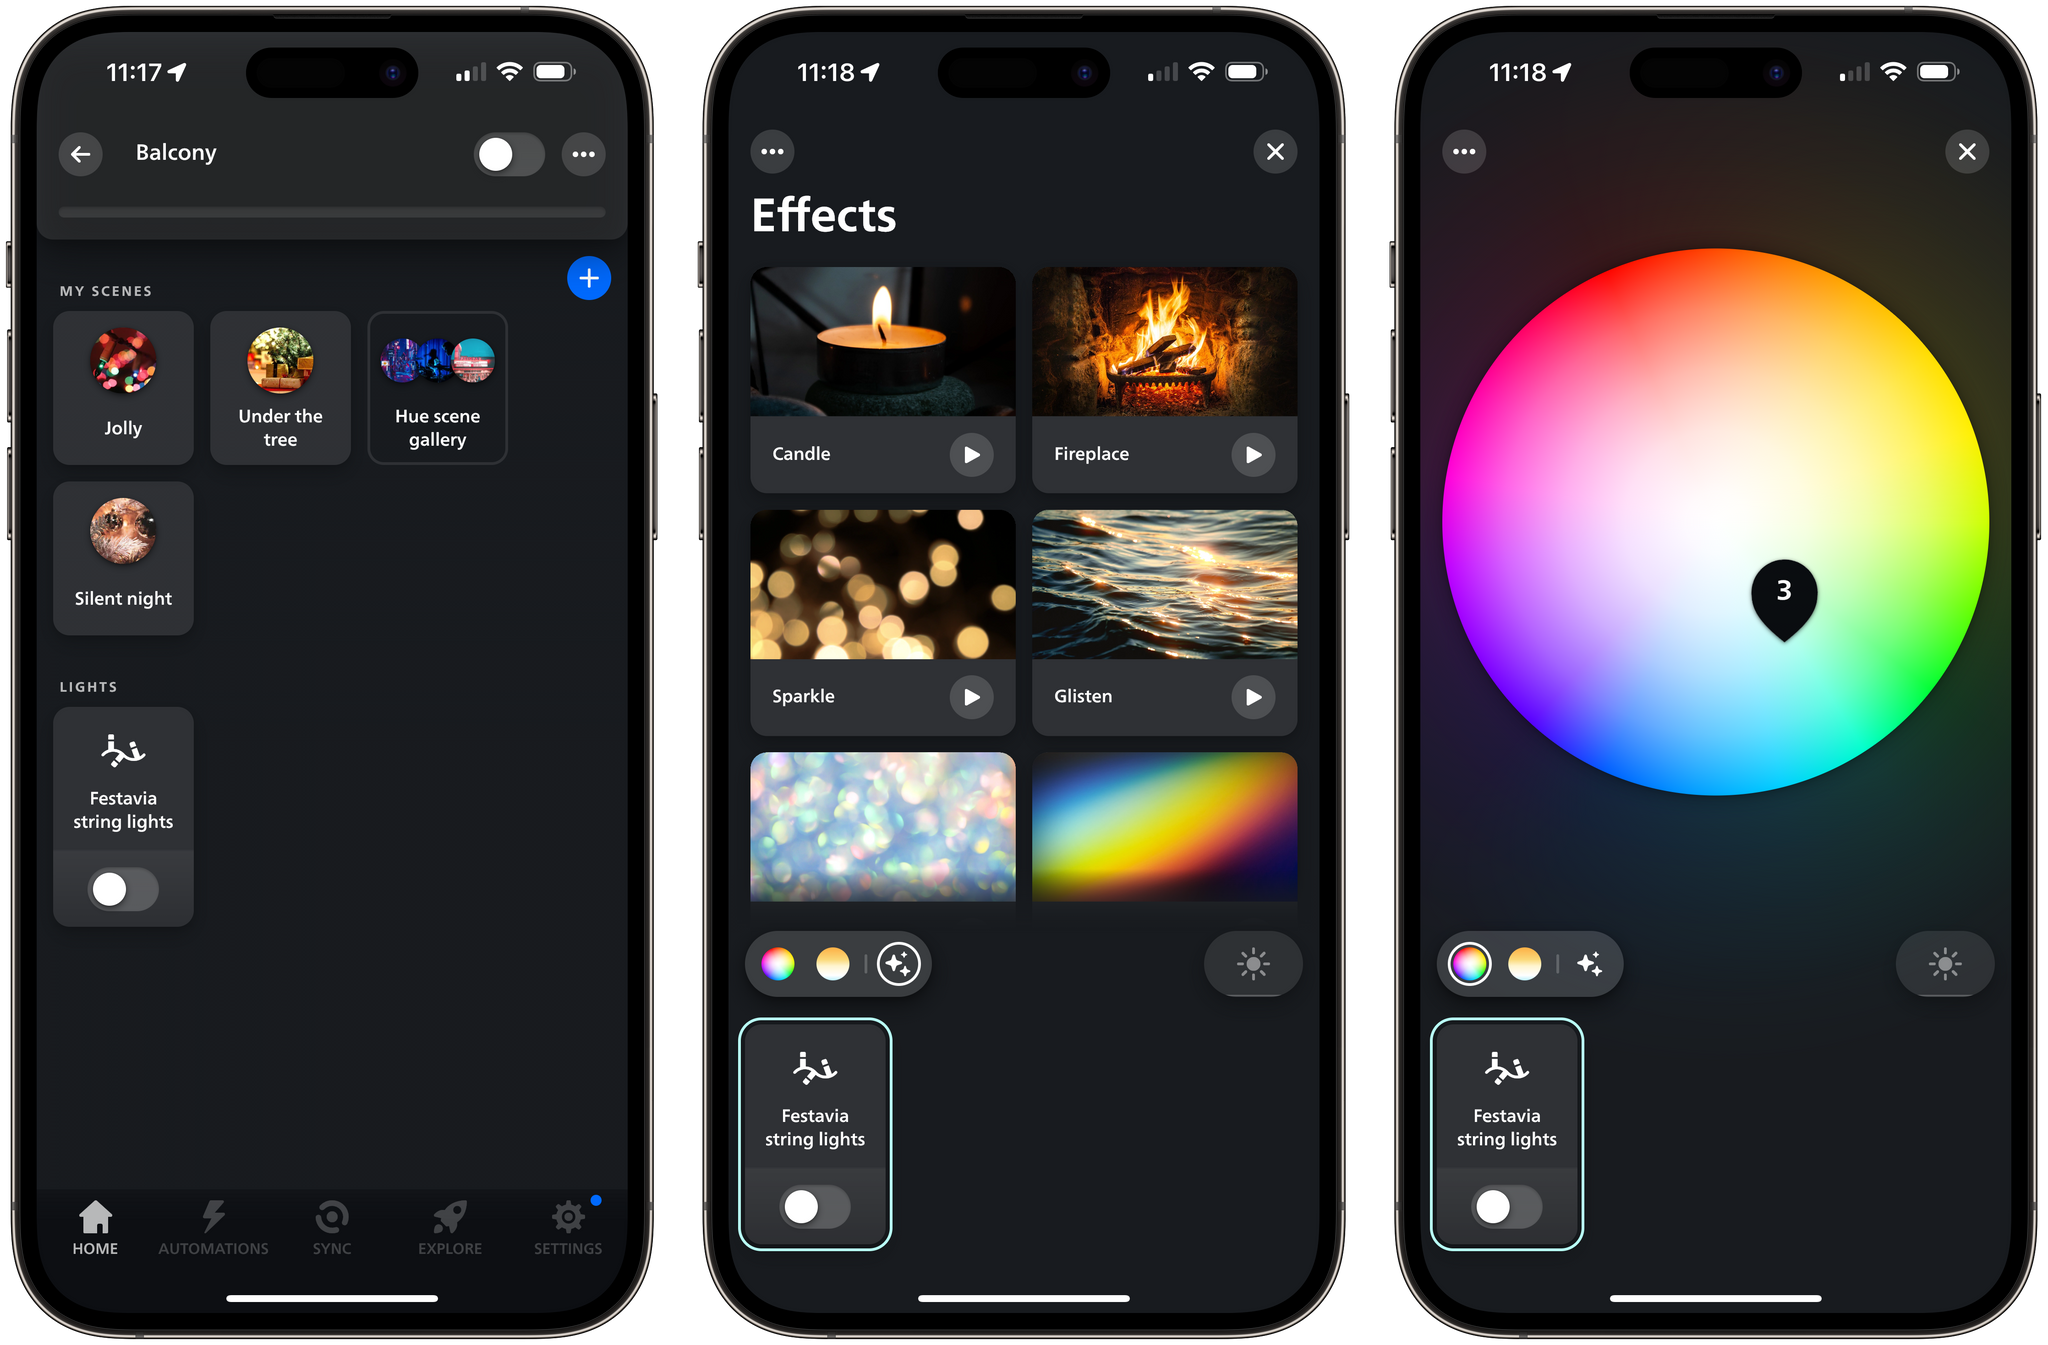 Hue's app lets you set colorful animated lighting scenes.